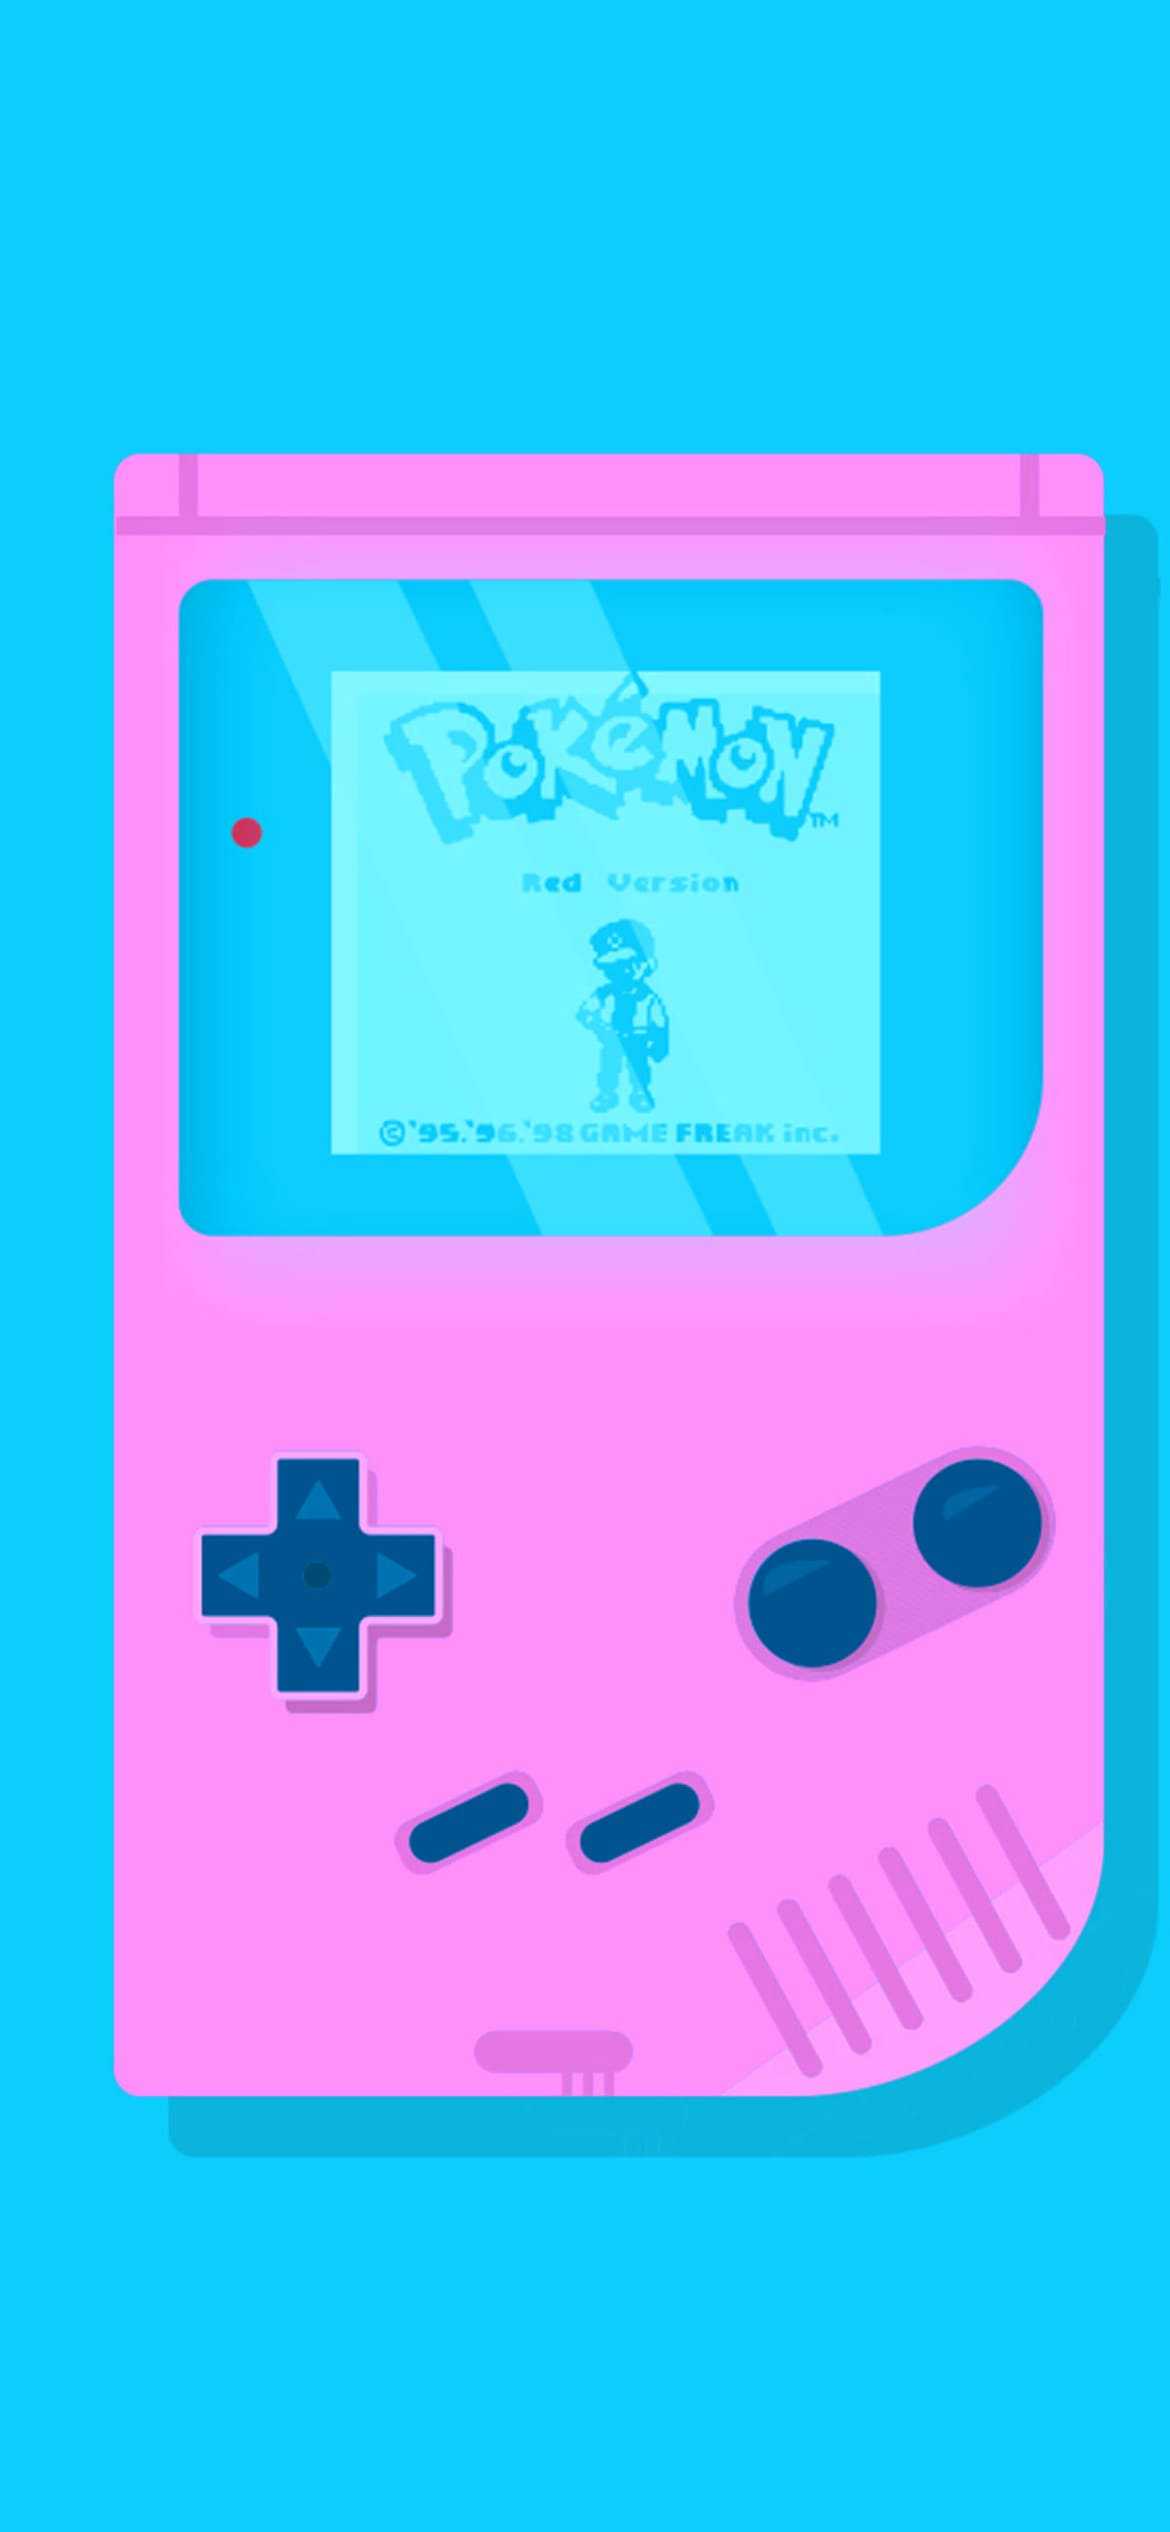 Pokemon Gameboy phone wallpaper you can download for free on the website! - Game Boy